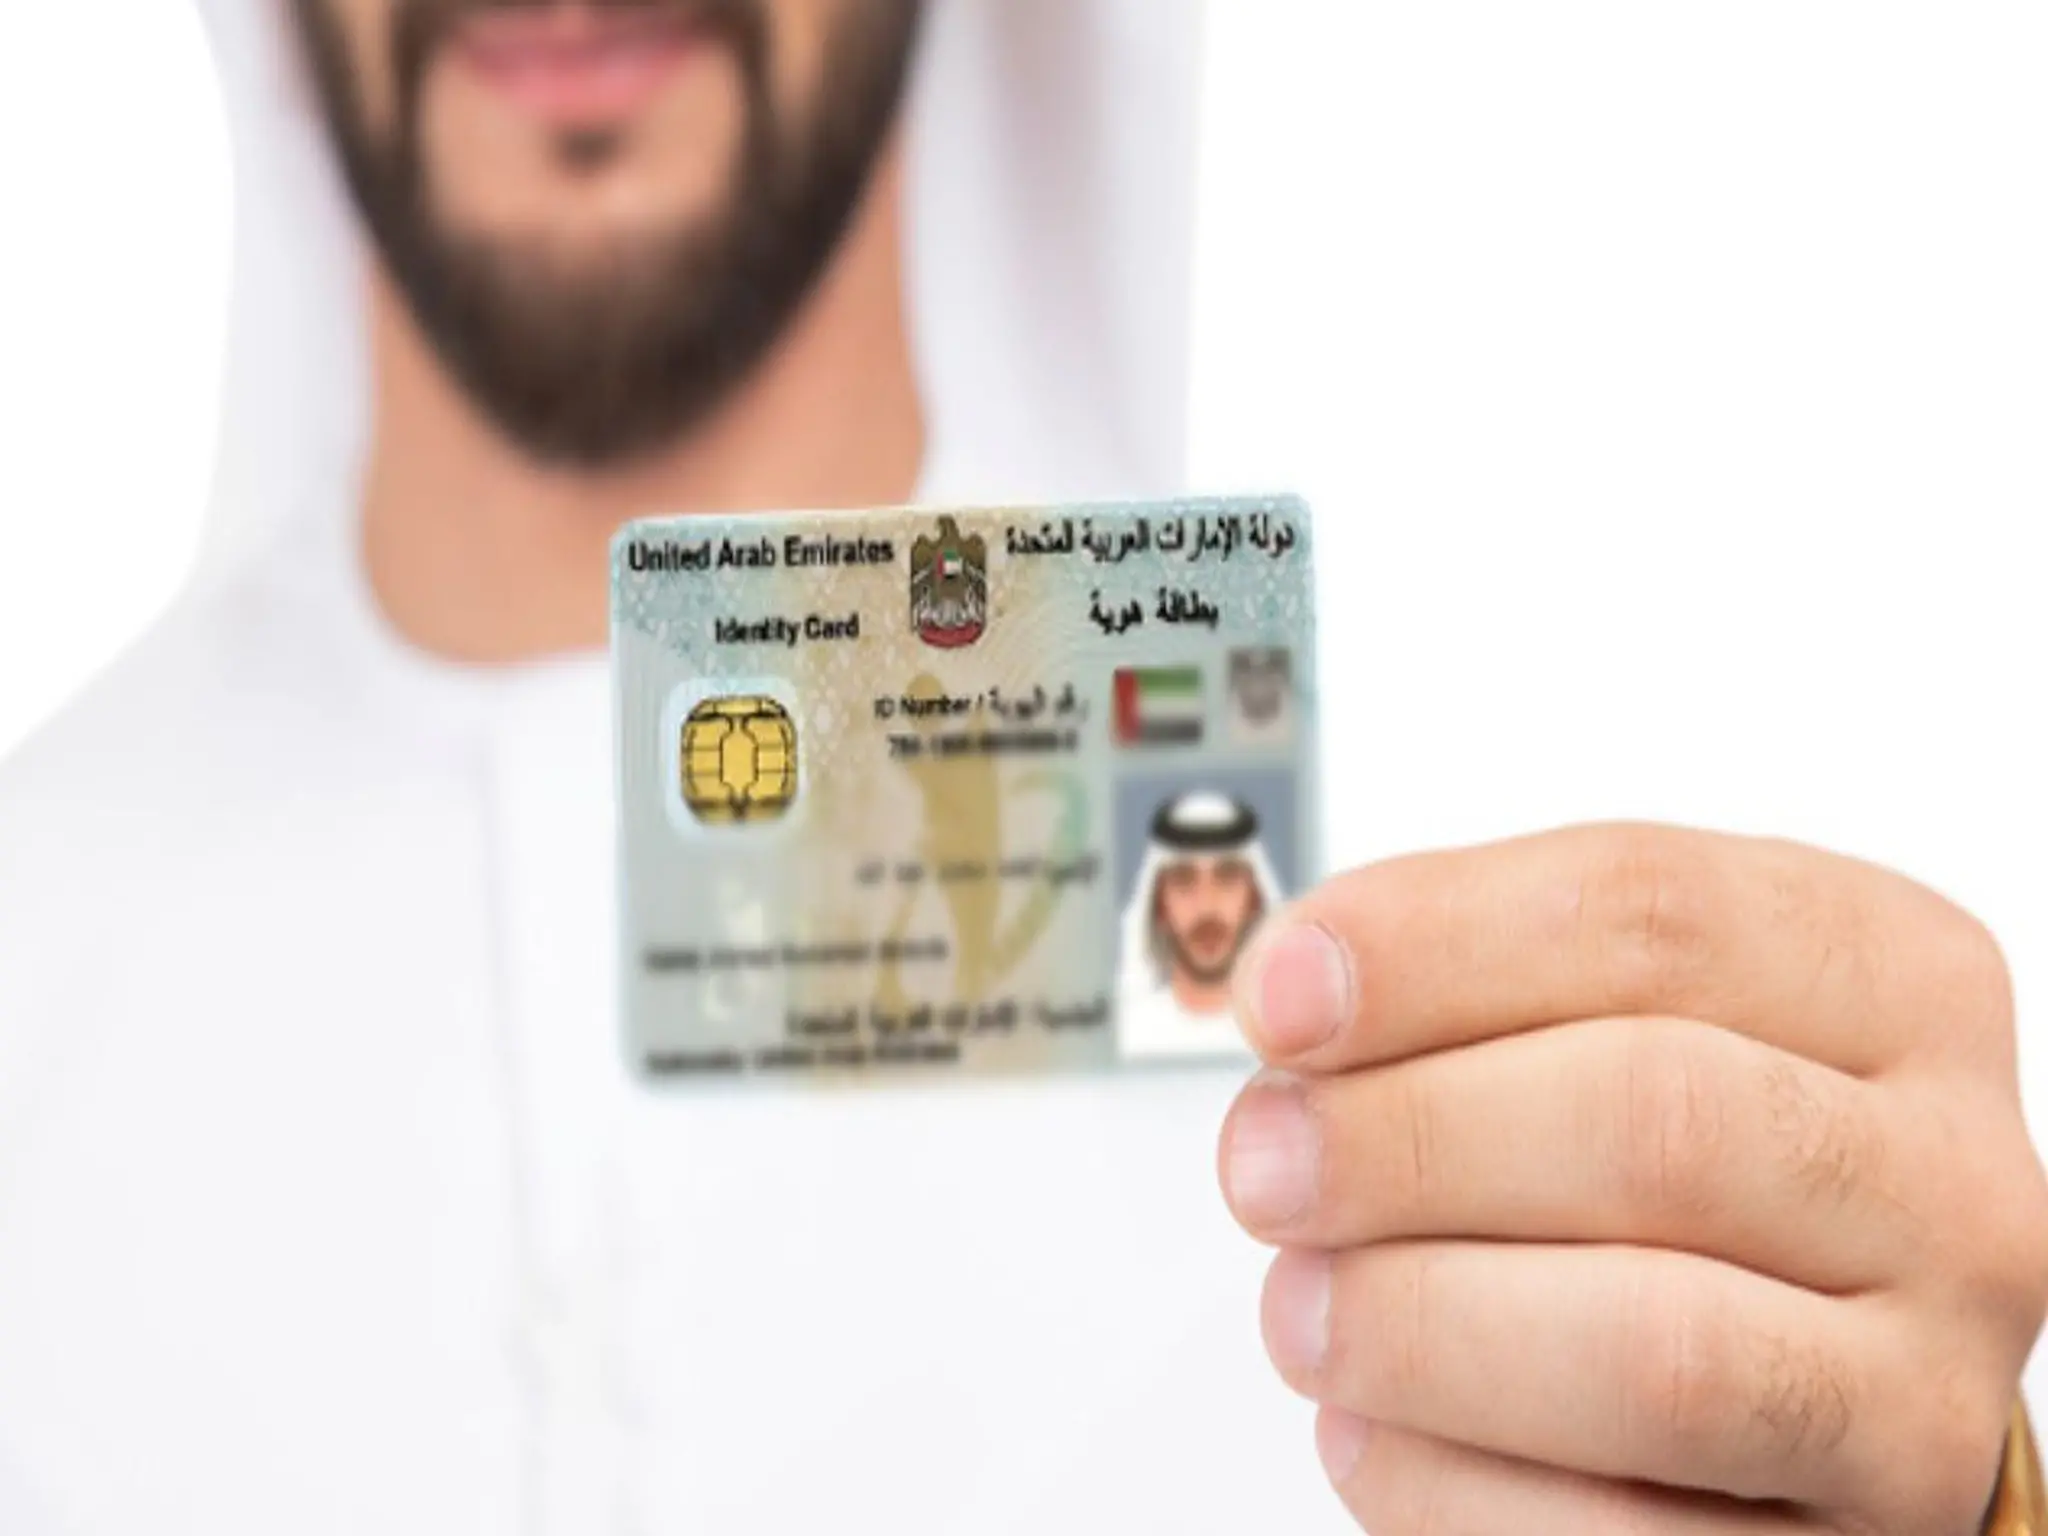 The UAE issues new services to help residents